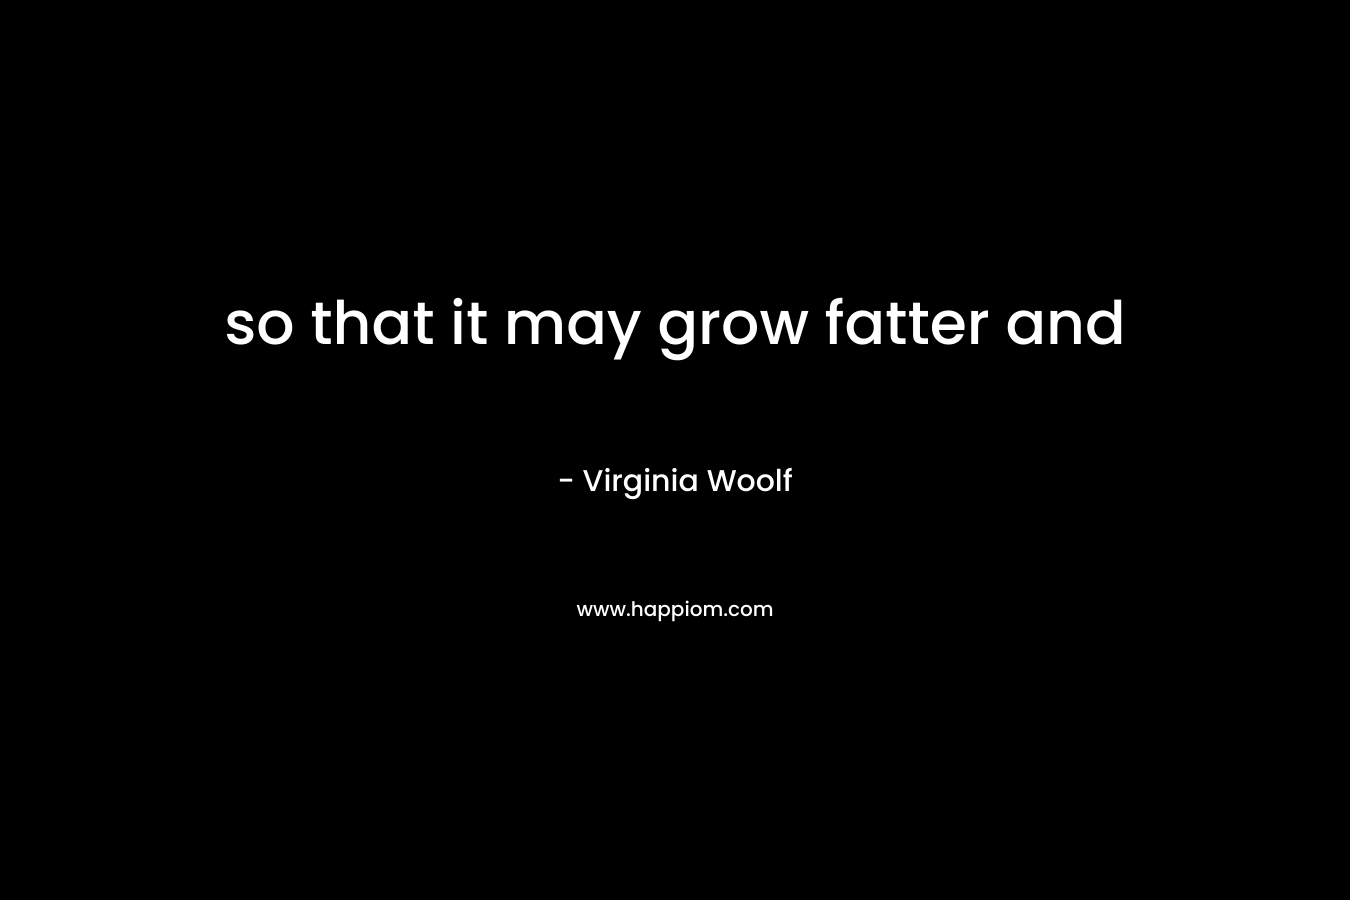 so that it may grow fatter and – Virginia Woolf